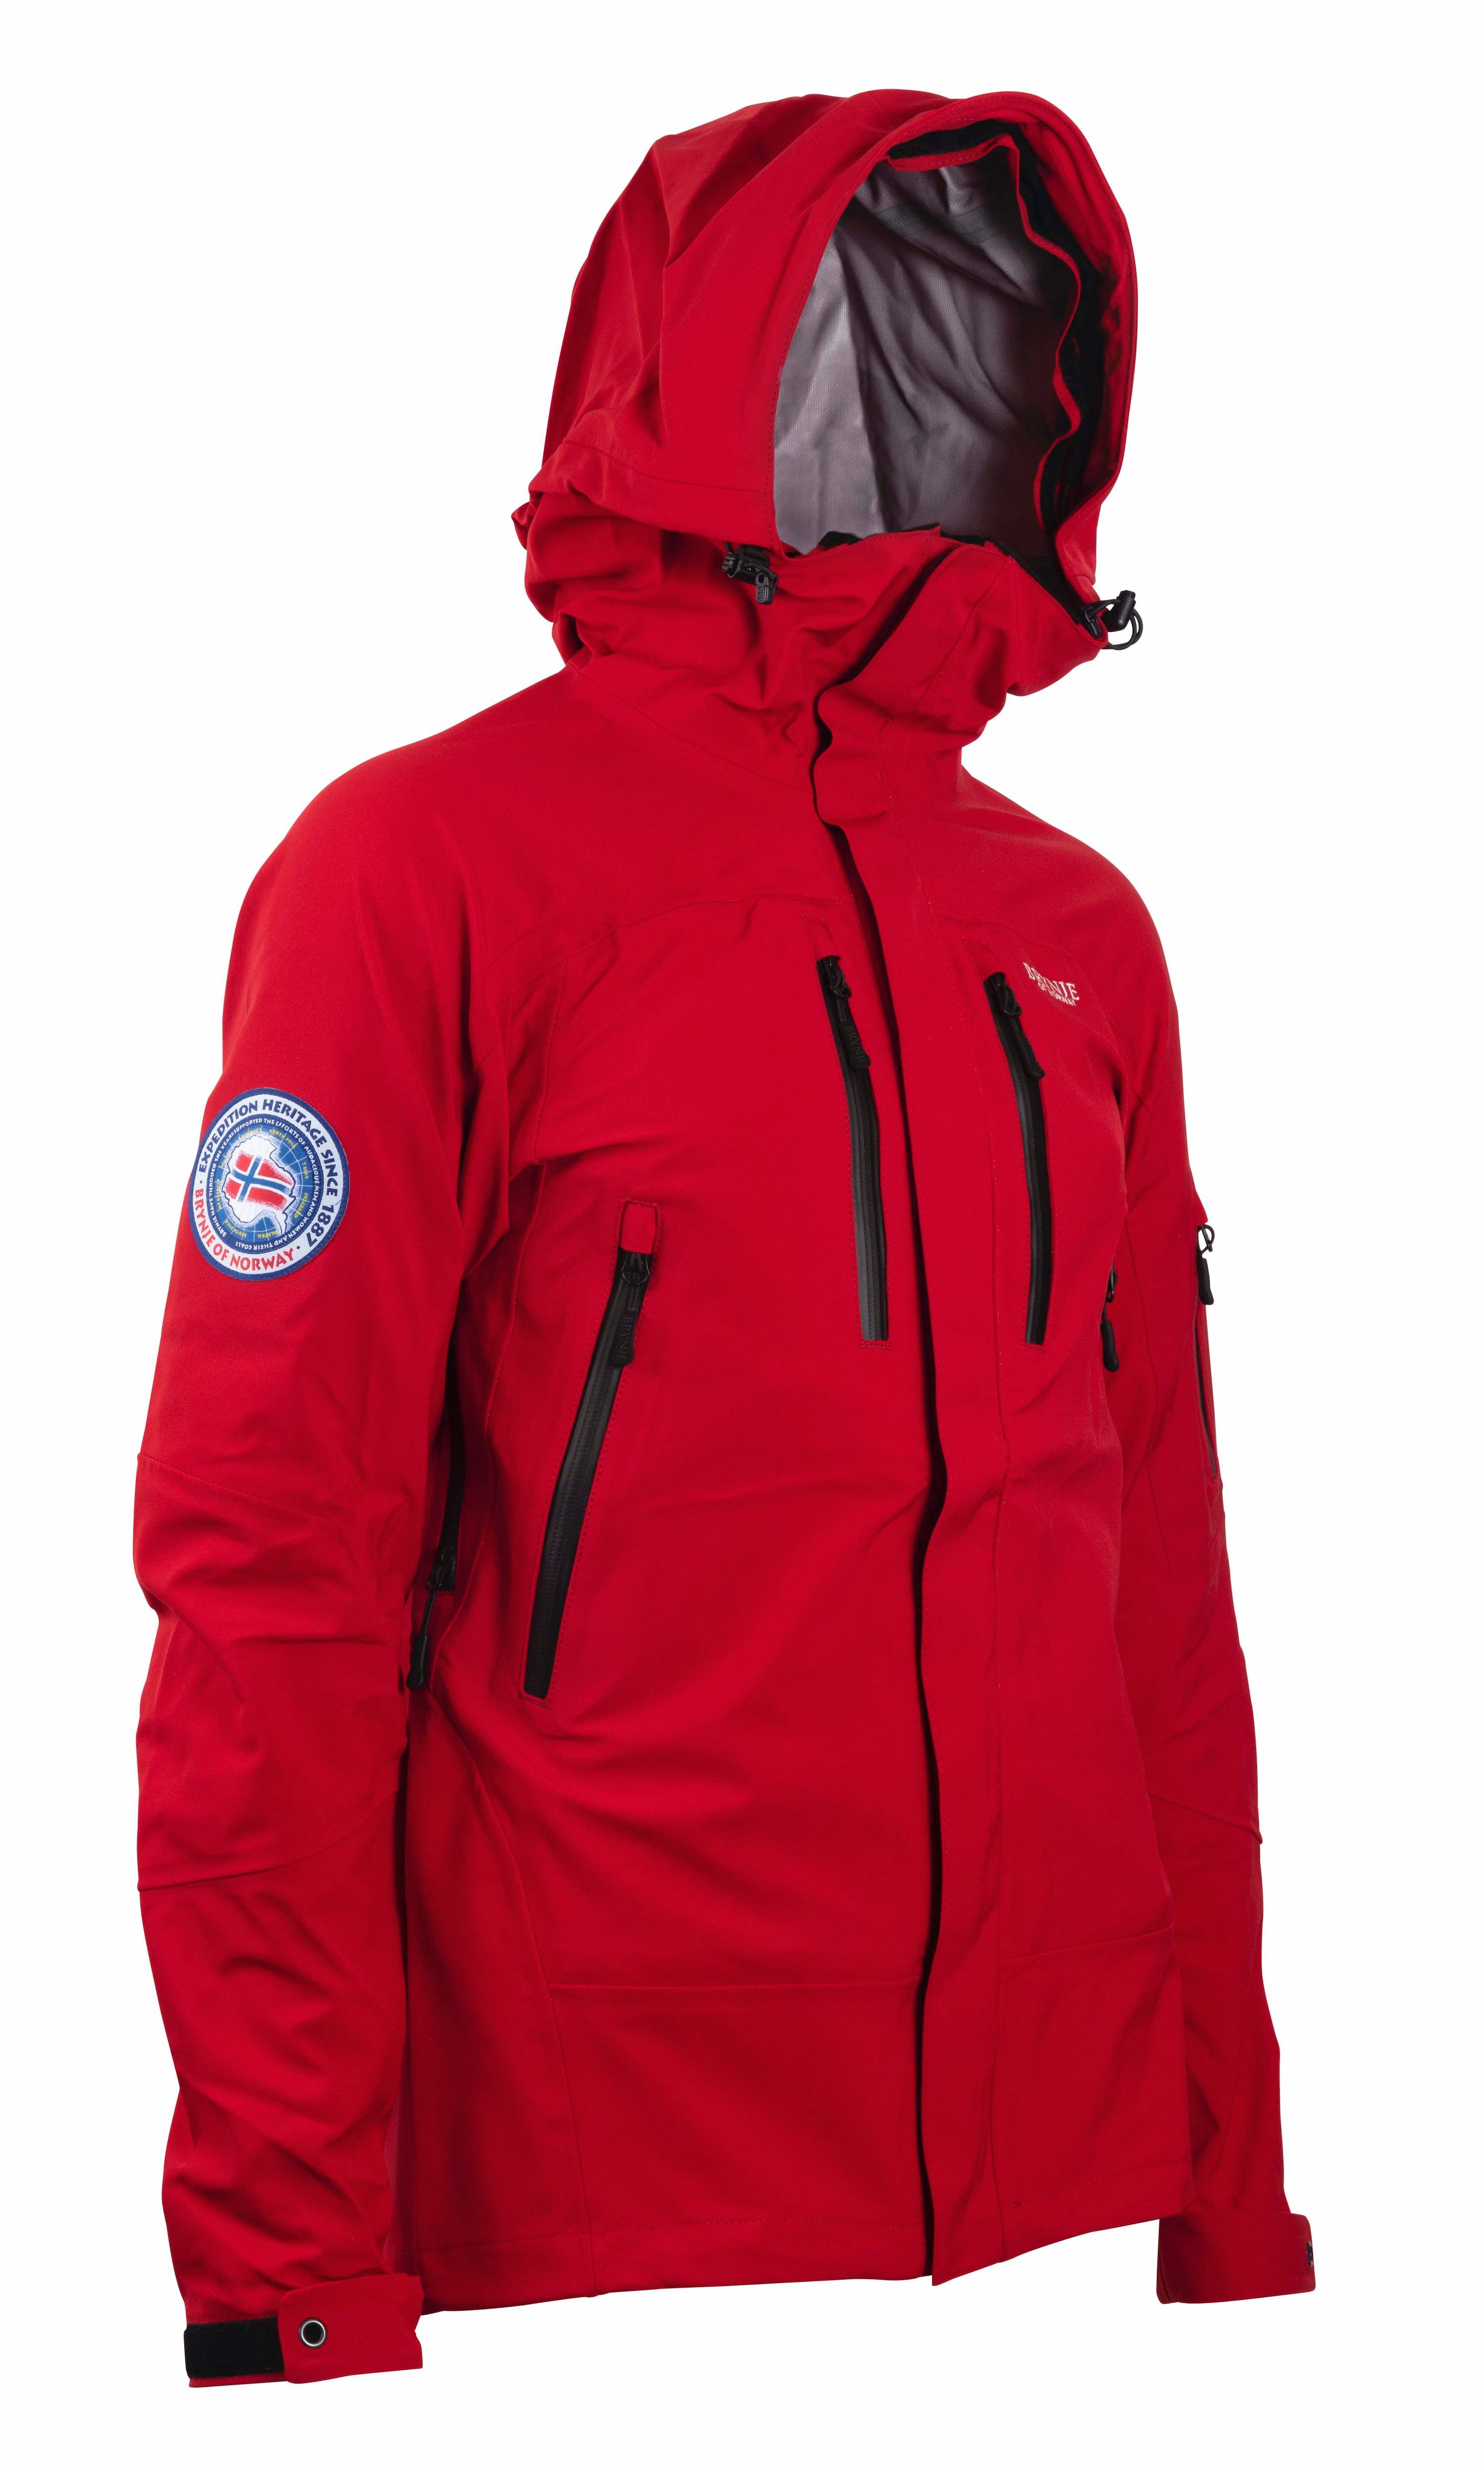 Expedition Jacket